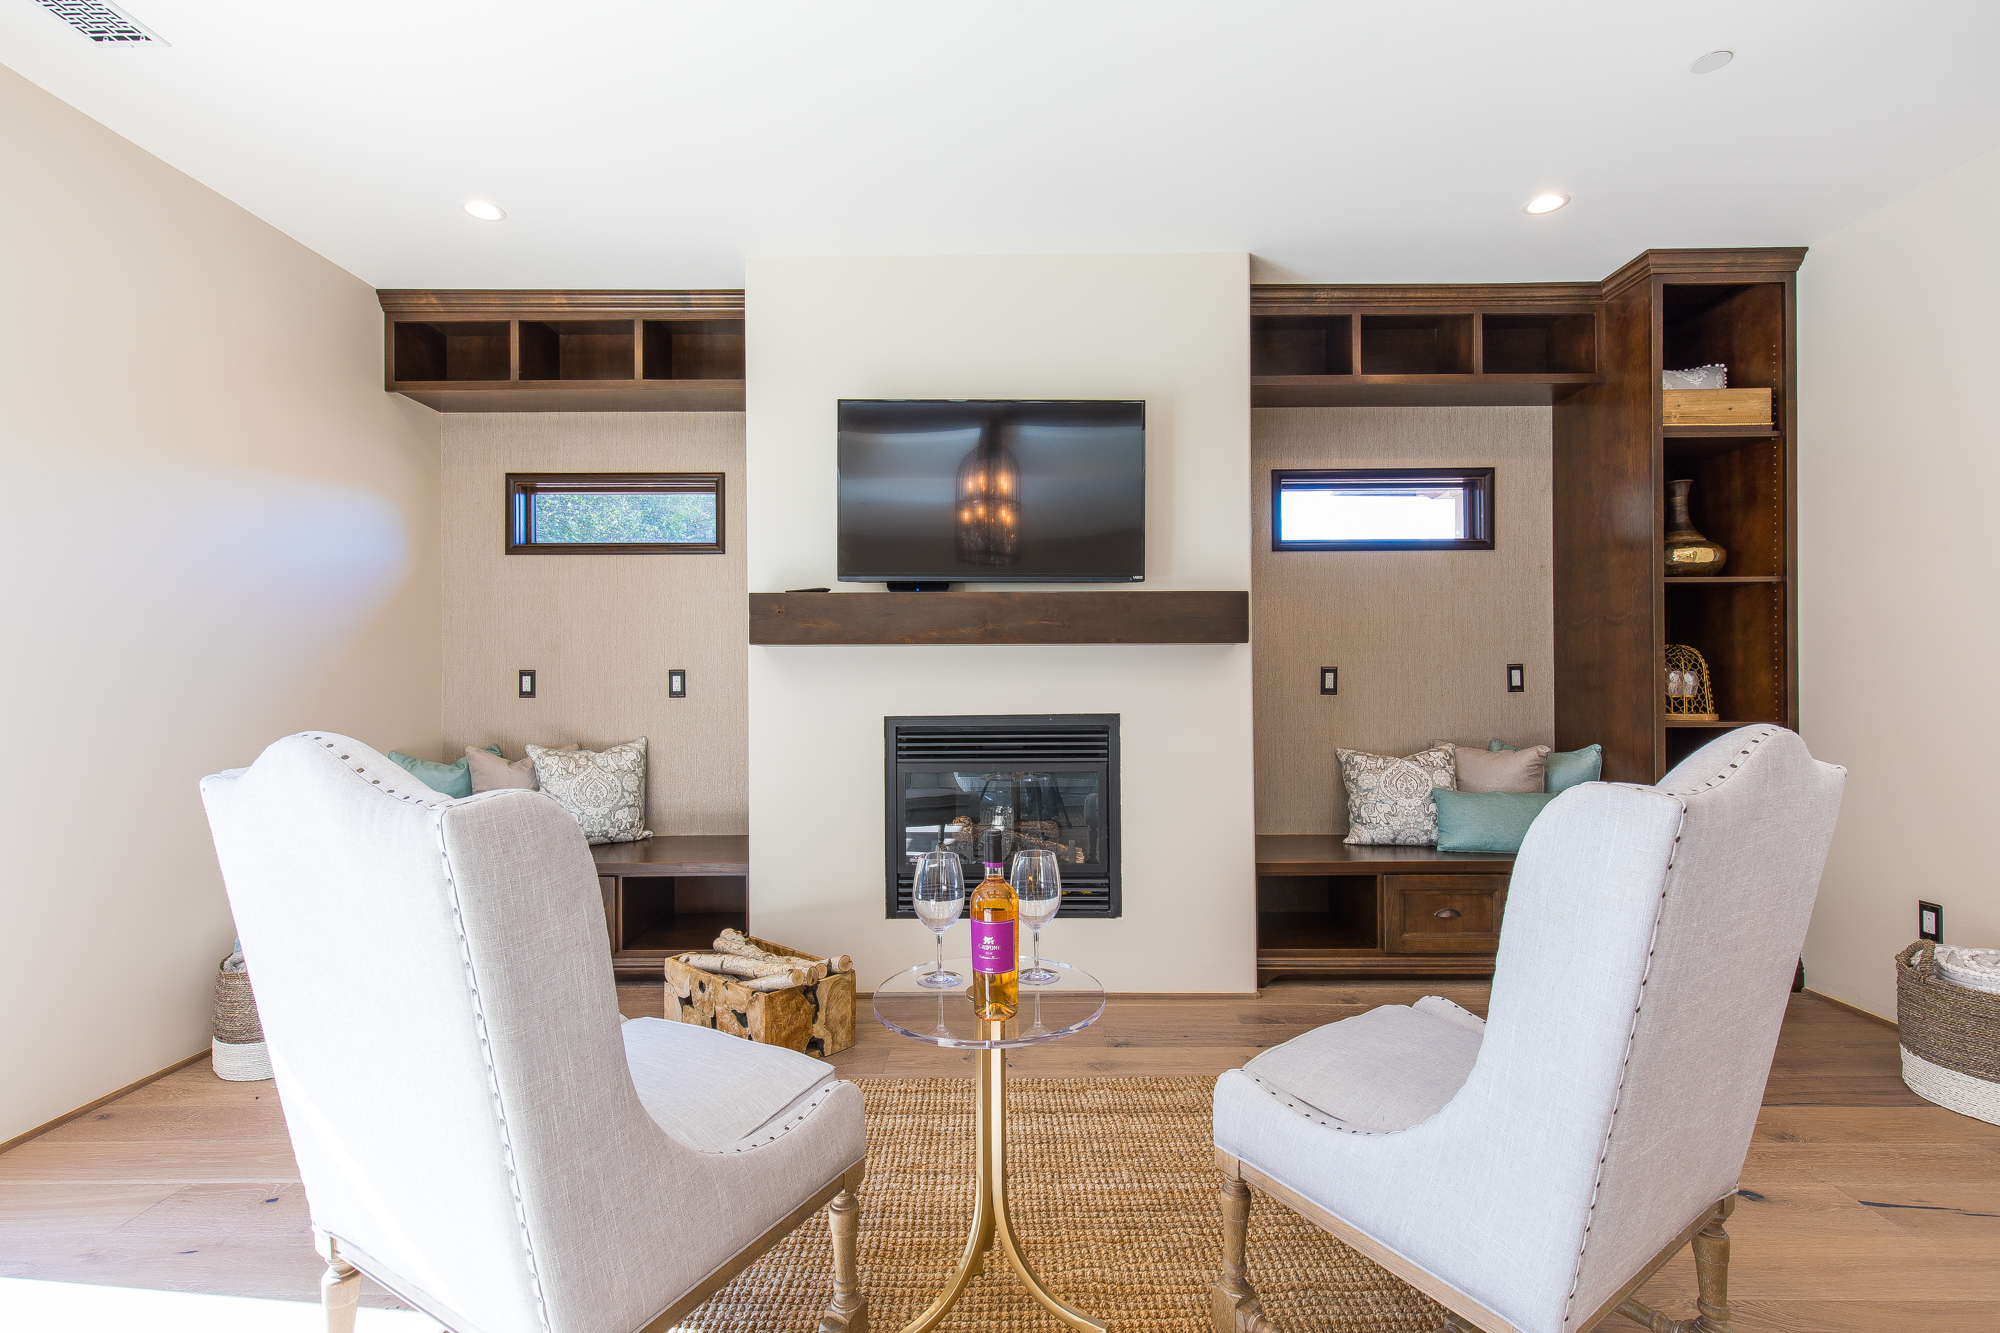  Custom made bench seating and open bookcase cabinetry flank the gas fireplace which sits below a hand-distressed and hand-stained wood mantle 